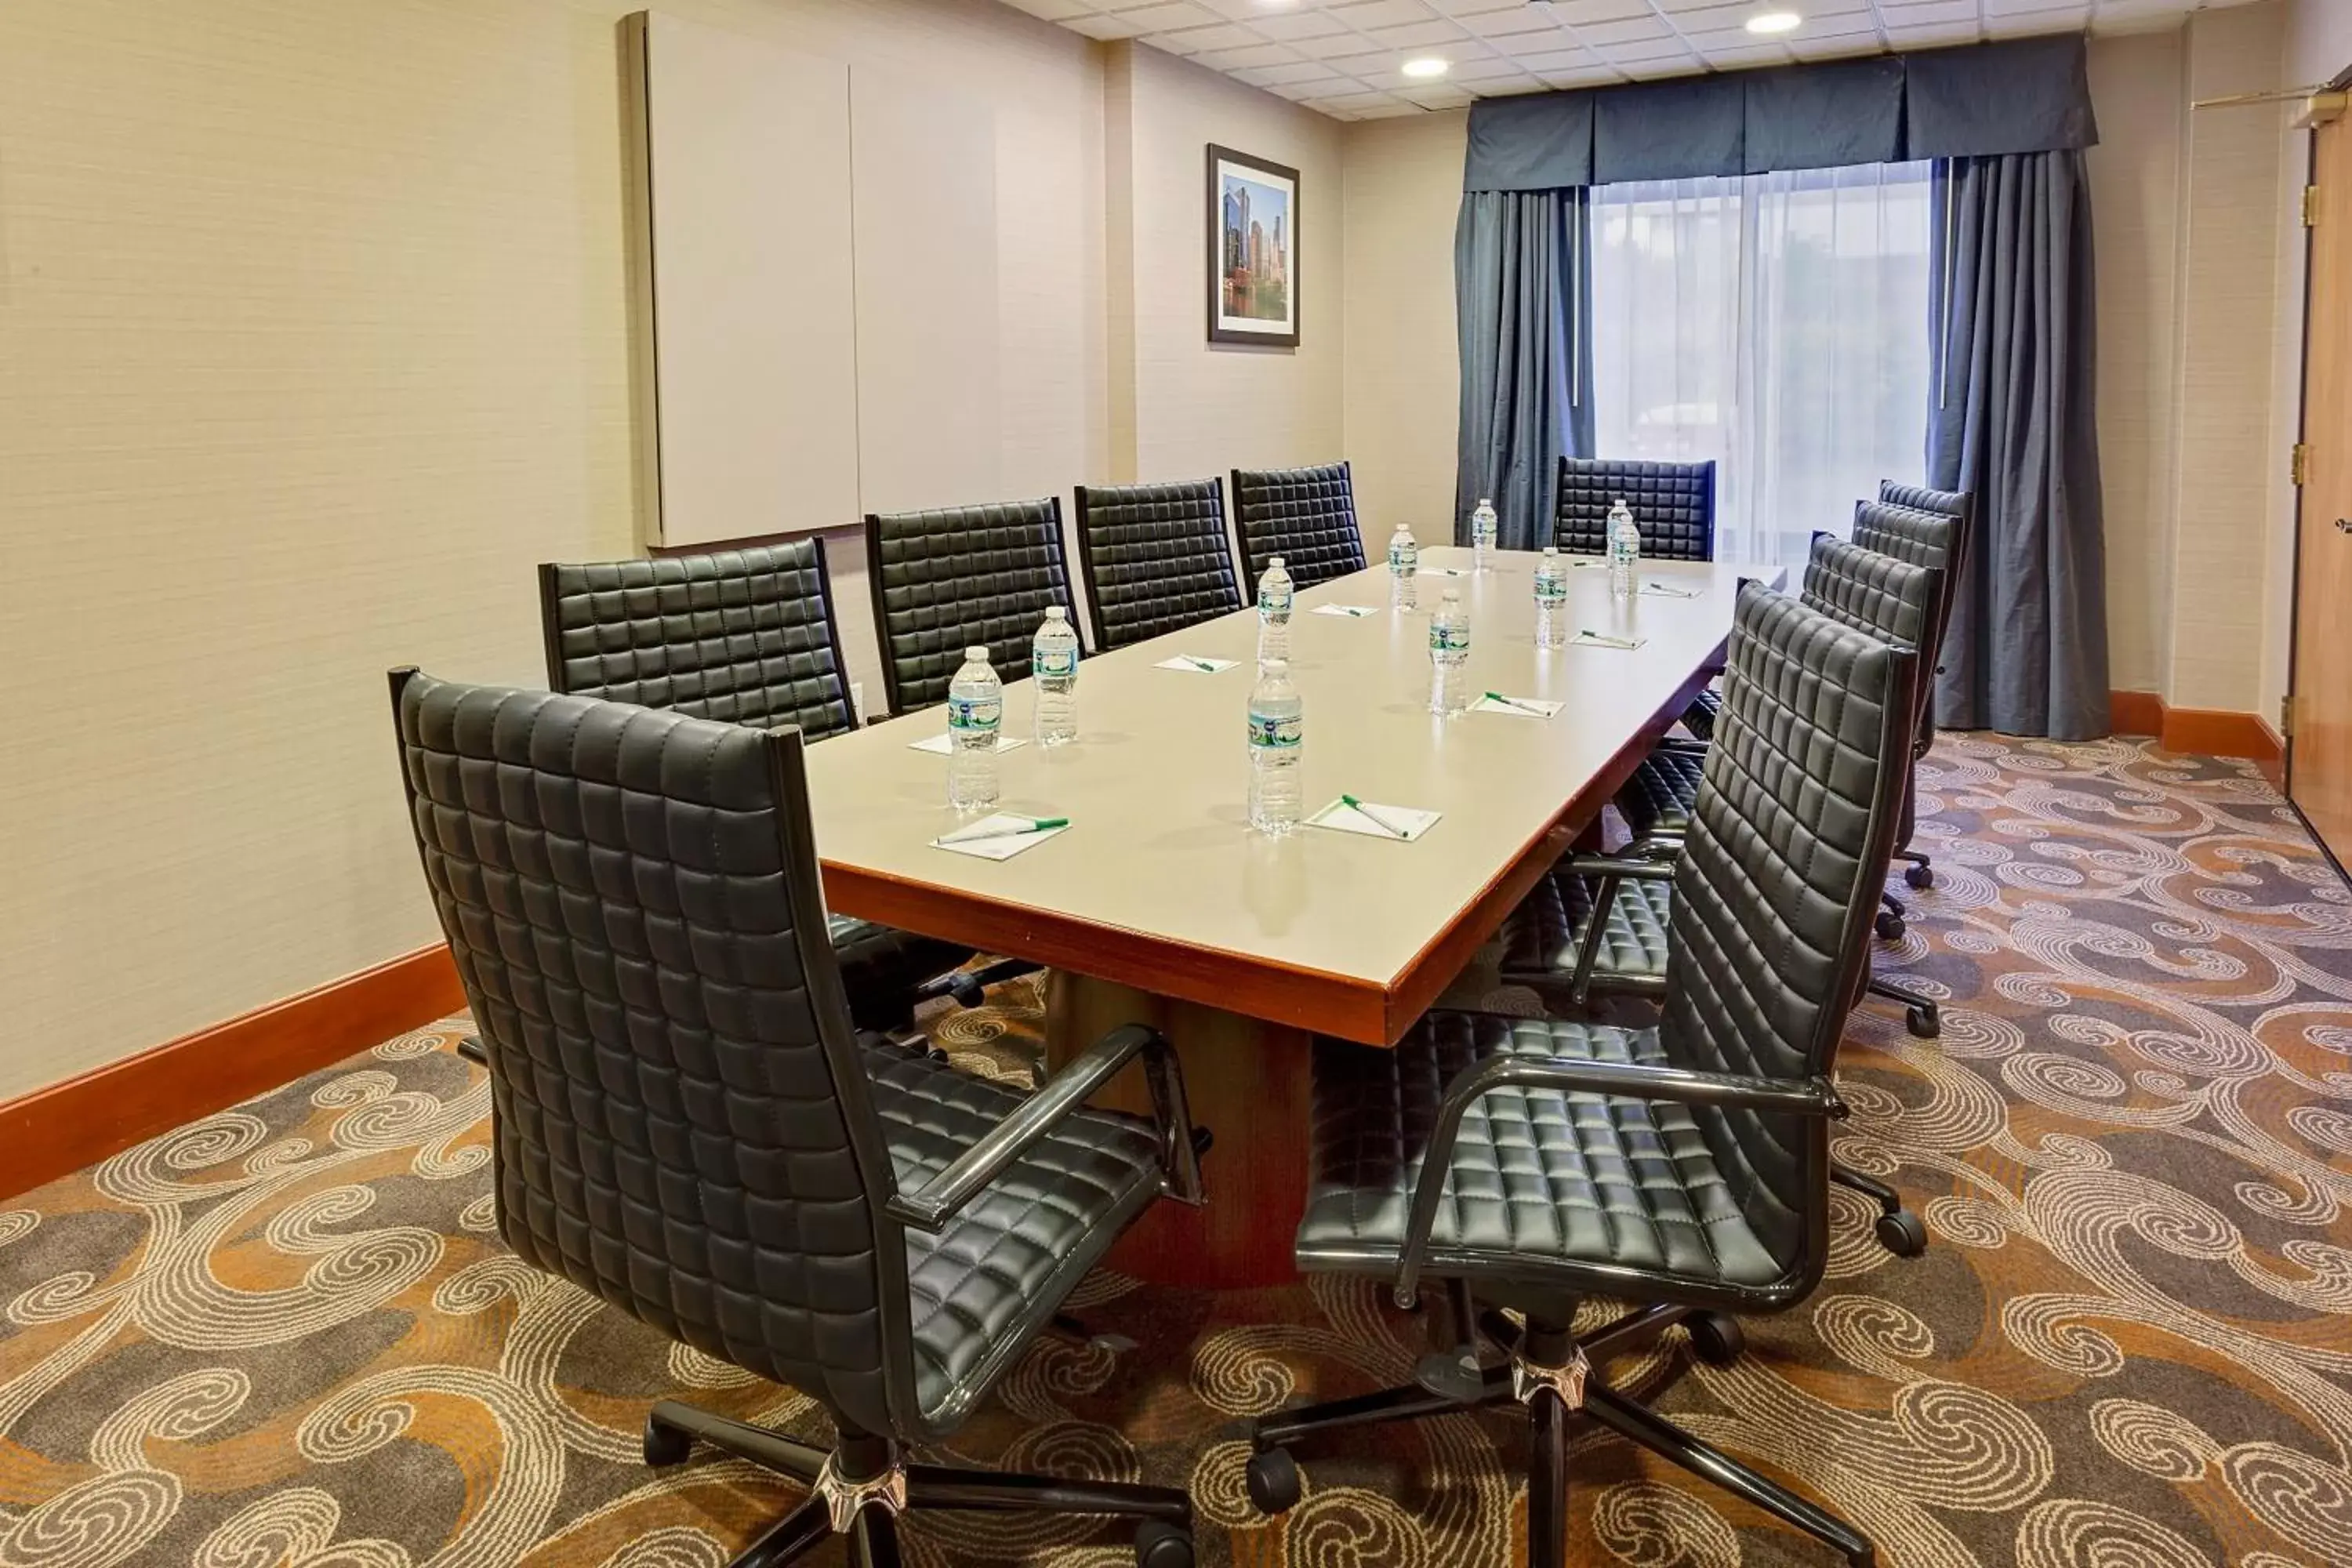 Meeting/conference room in Wingate by Wyndham - Arlington Heights